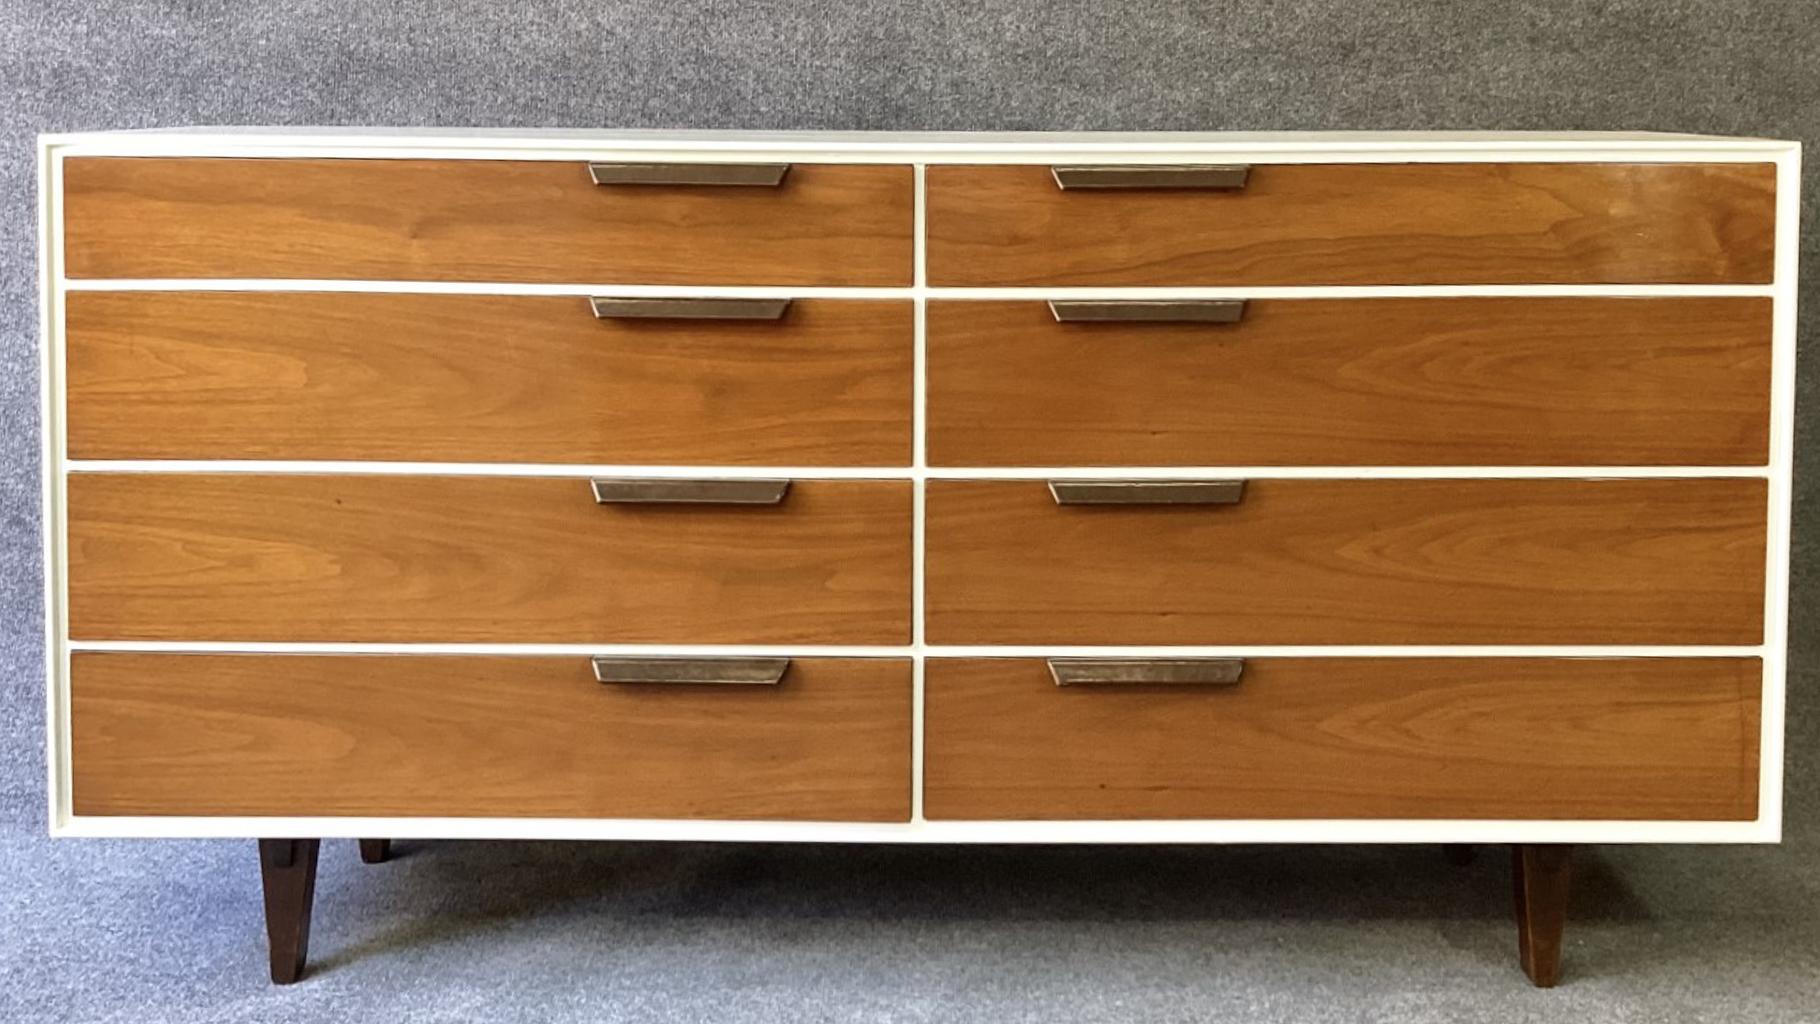 A stunning large double dresser in restored white enamel case, with warmly contrasting figured and book-matched walnut drawer fronts, having brown leather wrapped handles. This well-known and fully documented dresser is nevertheless rarely seen in